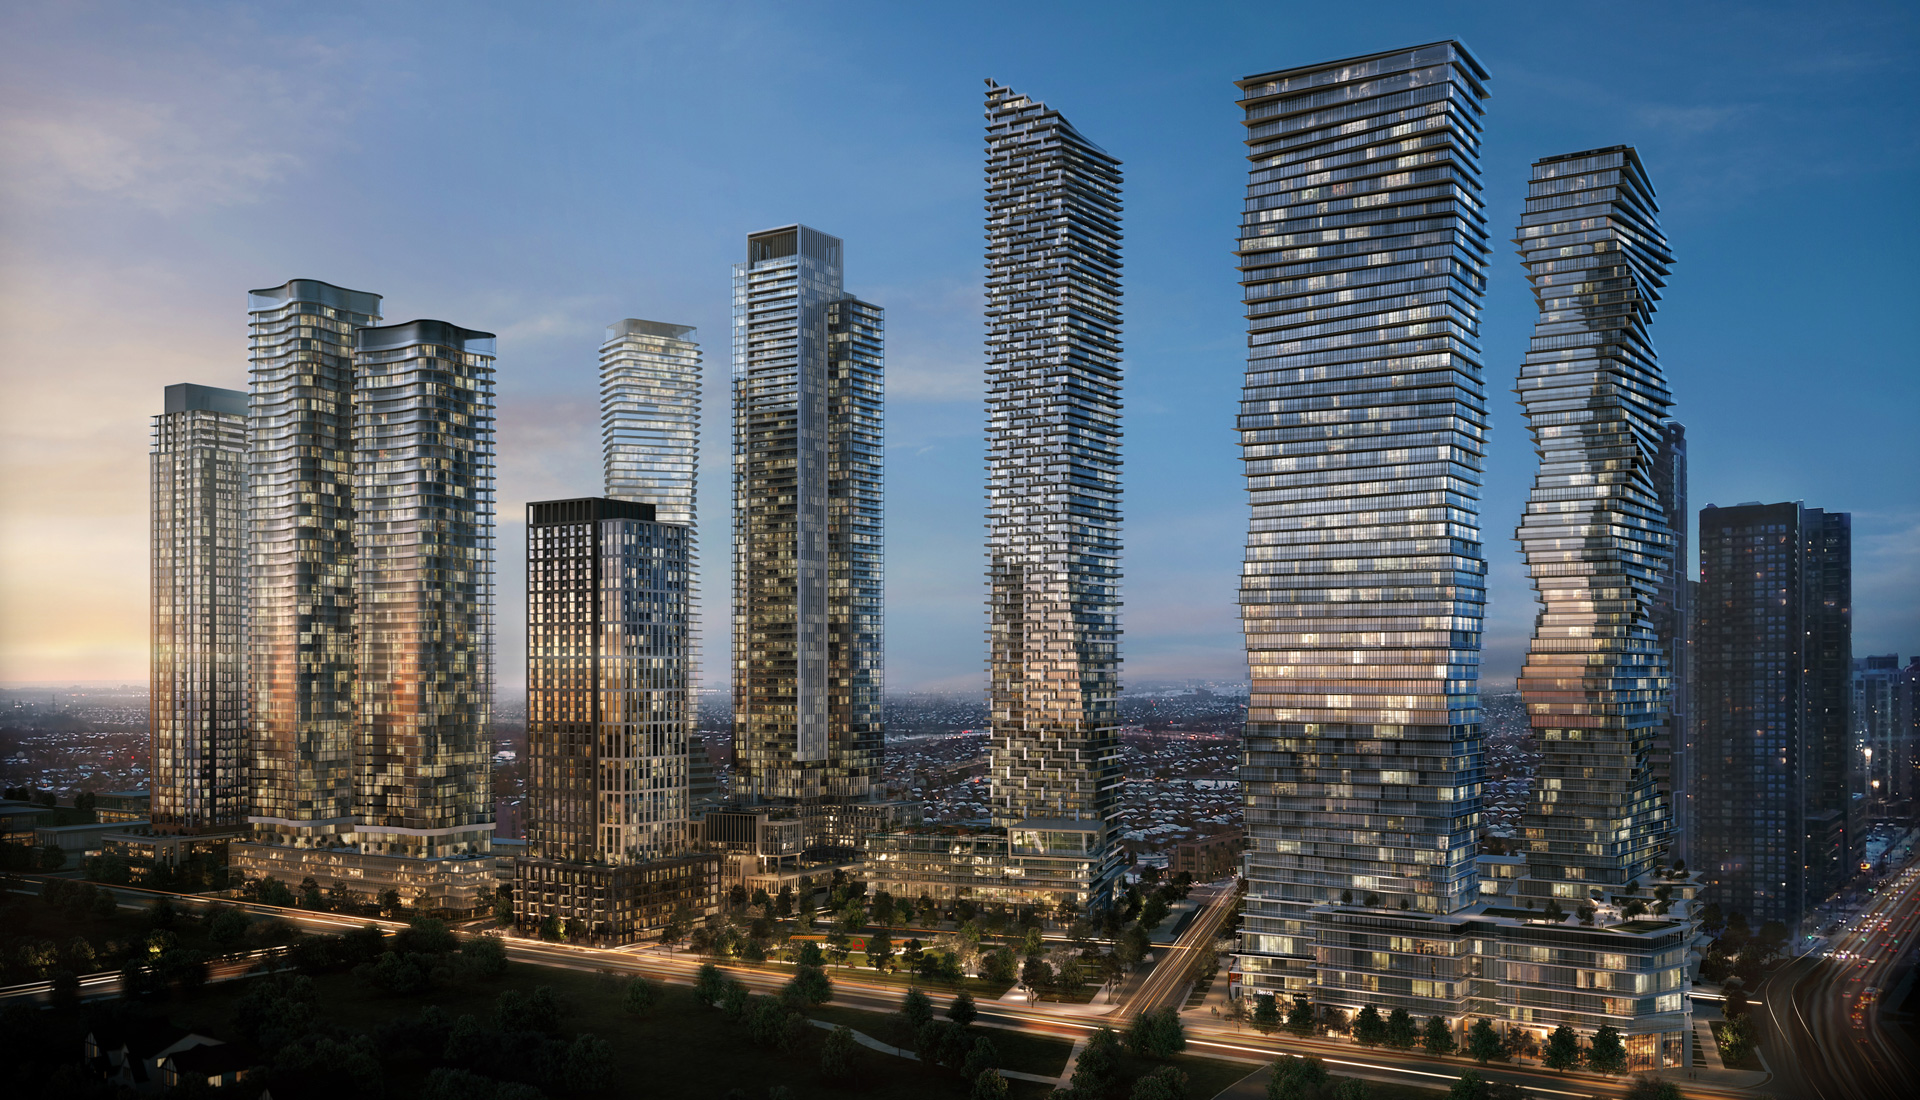 M6 condos located in mississauga and developed by Urban Capital and Rogers Real Estate Development Limited